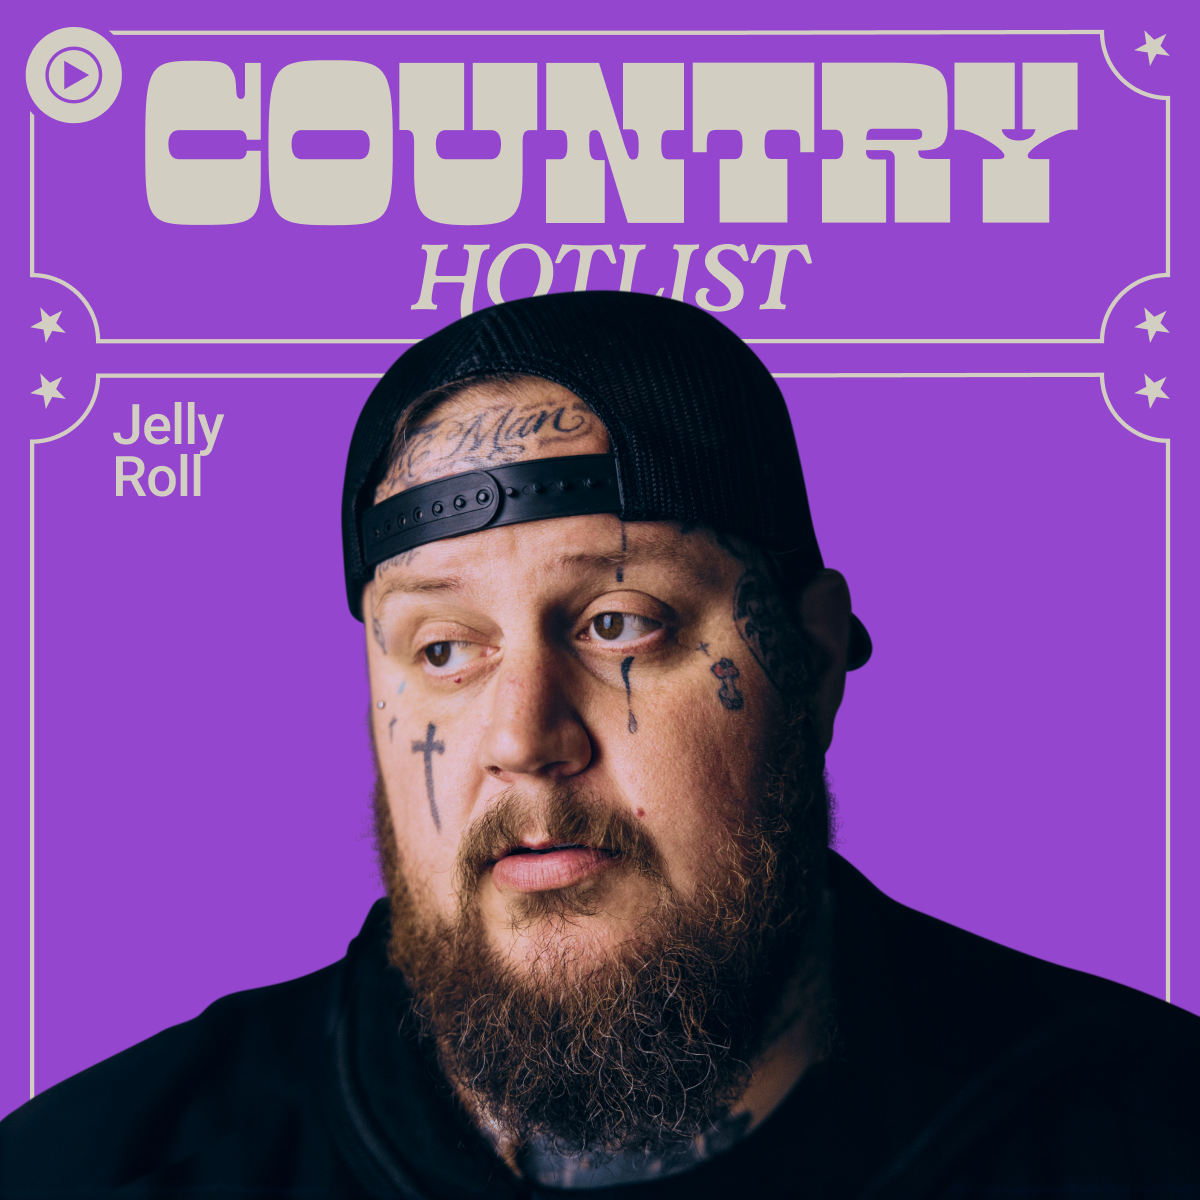 COUNTRY MUSIC HOTLIST